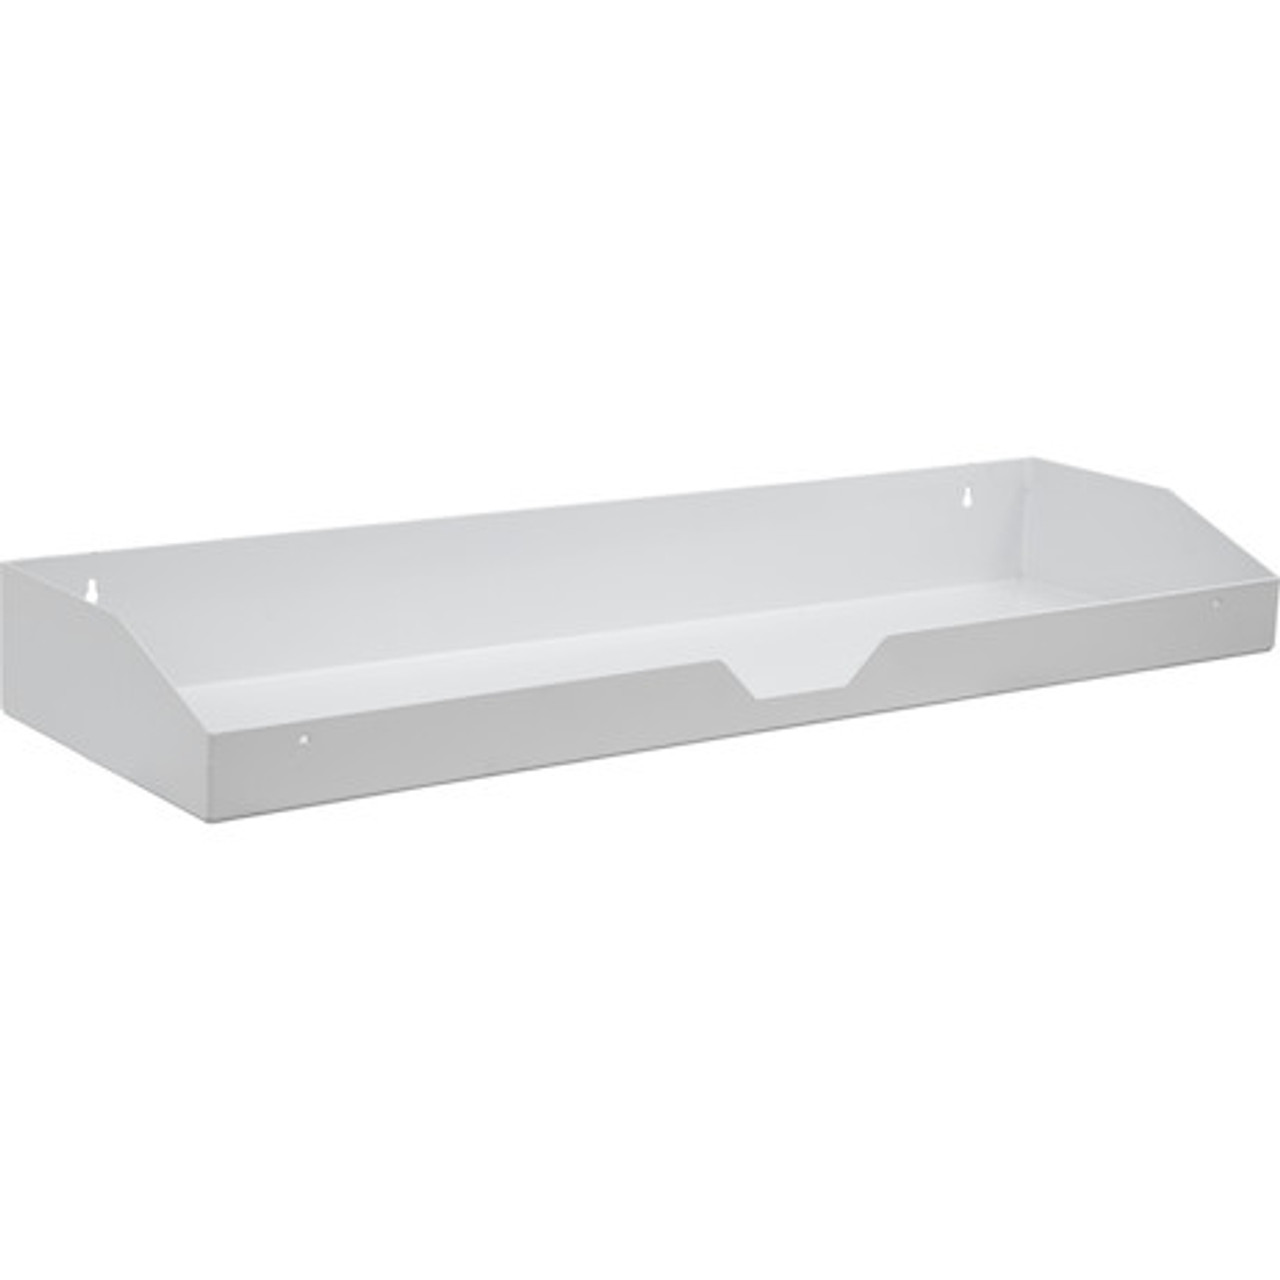 1702840TRAY - Interior Storage Tray for 16X13X72 Inch White Steel Topsider Truck Box